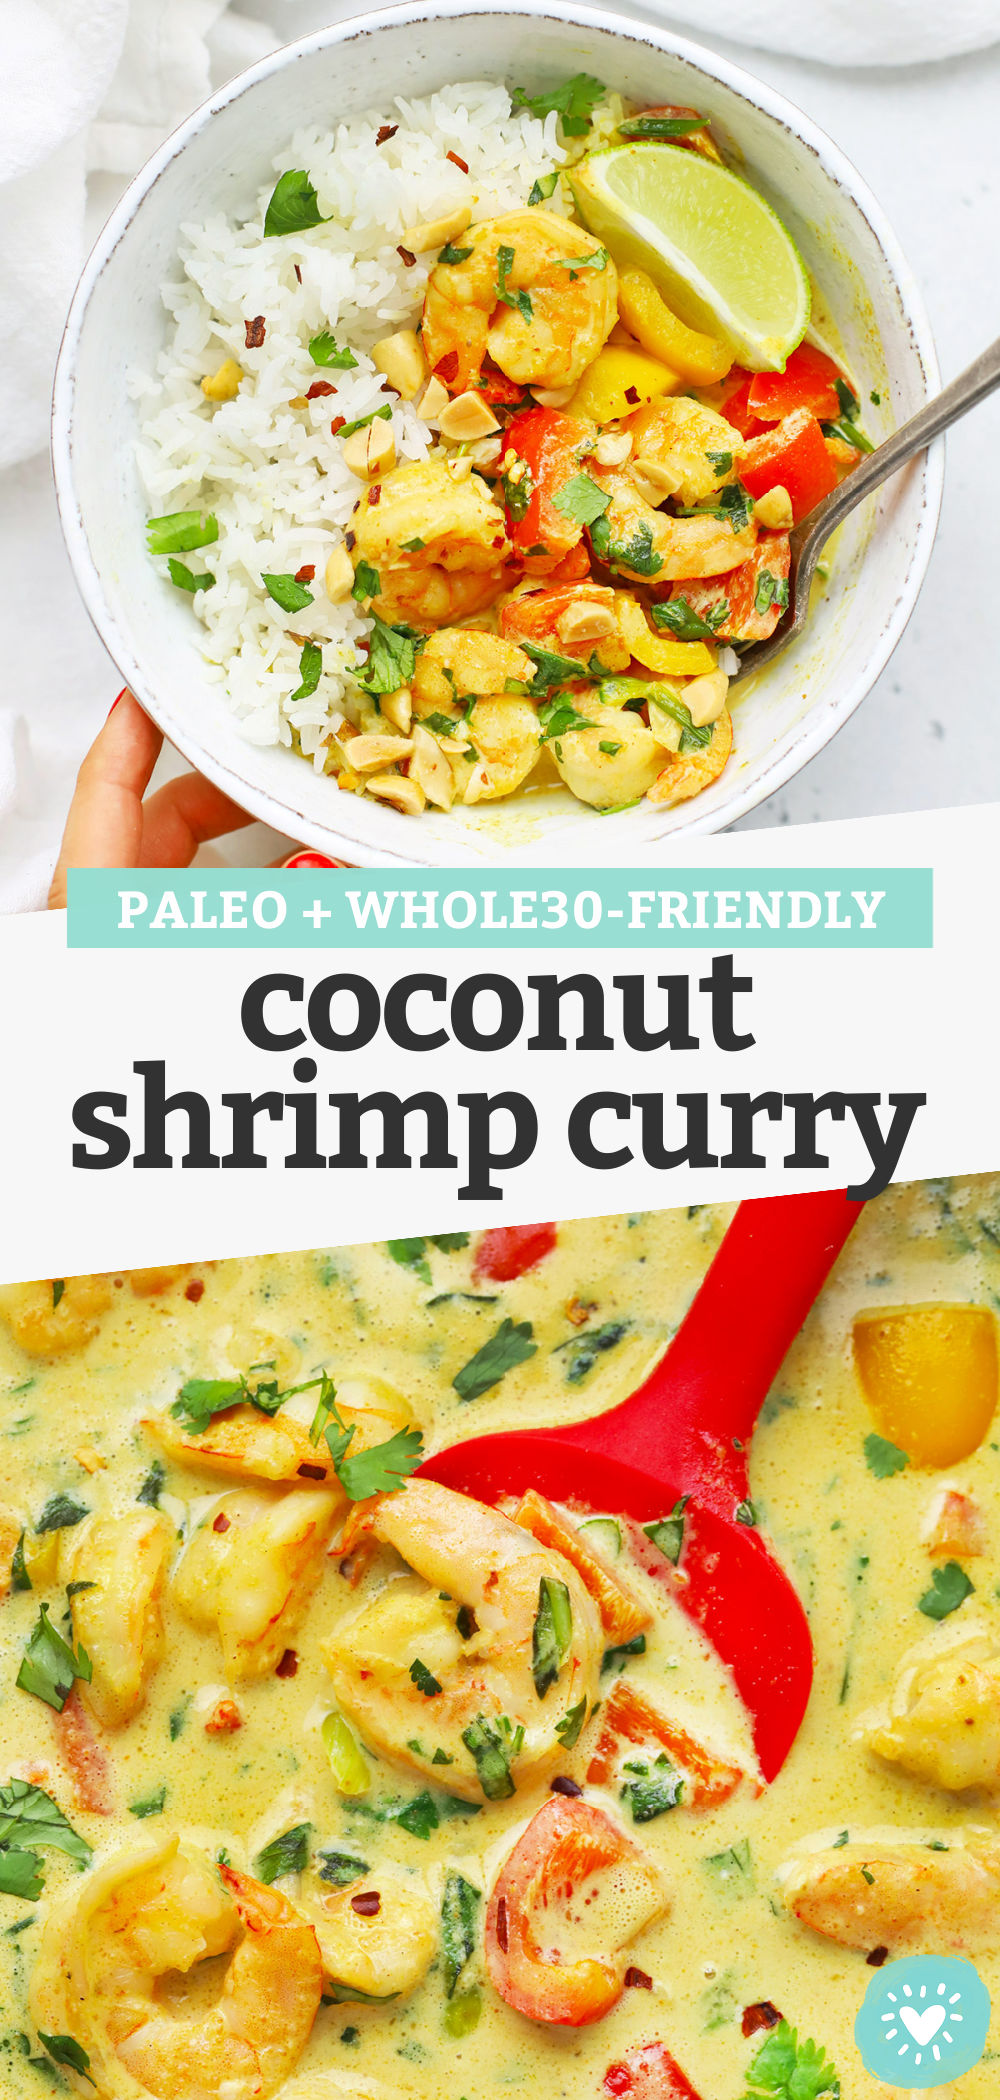 Creamy Coconut Shrimp Curry. This paleo shrimp curry recipe has a gorgeous coconut curry sauce and colorful veggies that make it extra special. // Shrimp curry recipe // healthy shrimp curry // easy shrimp curry #curry #shrimp #dinner #healthydinner #shrimpcurry #paleo #whole30